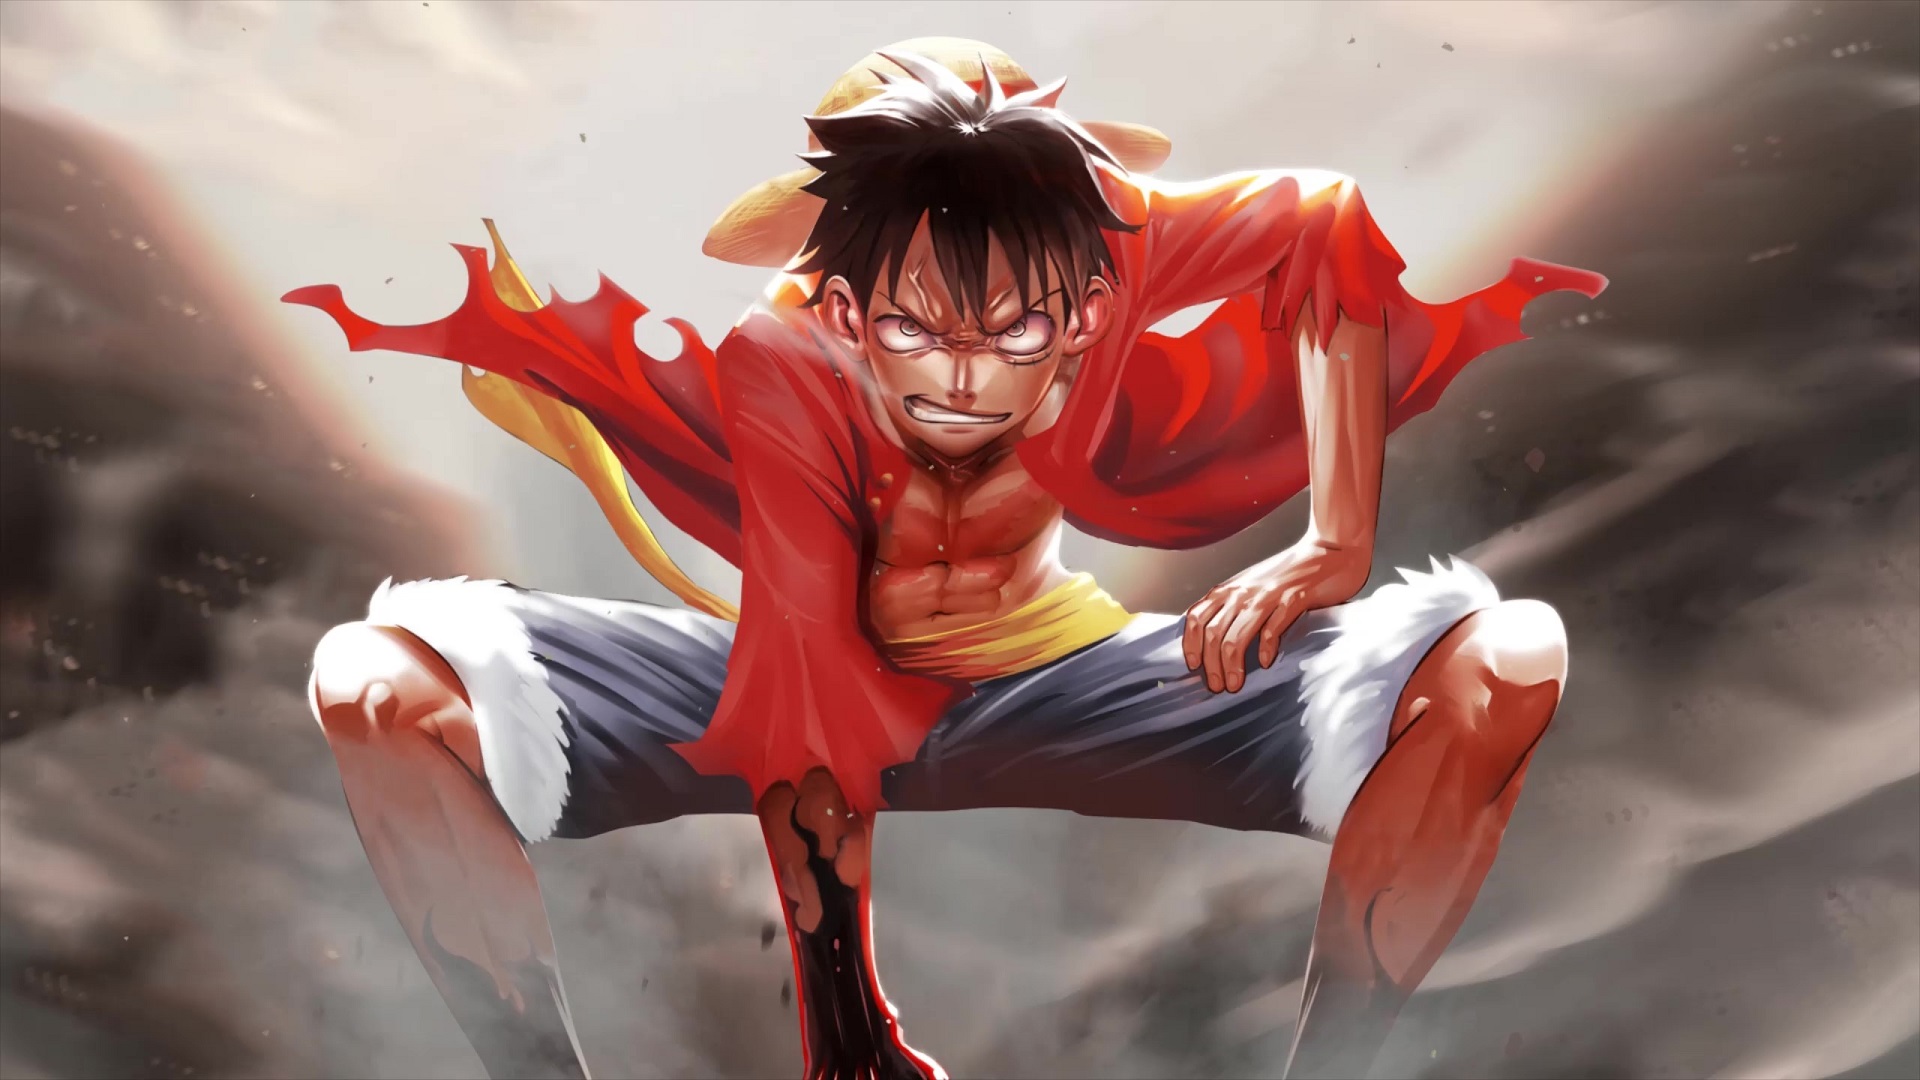 Luffy Gear 4th  One Piece Live Wallpaper  1920x1080  Rare Gallery HD  Live Wallpapers